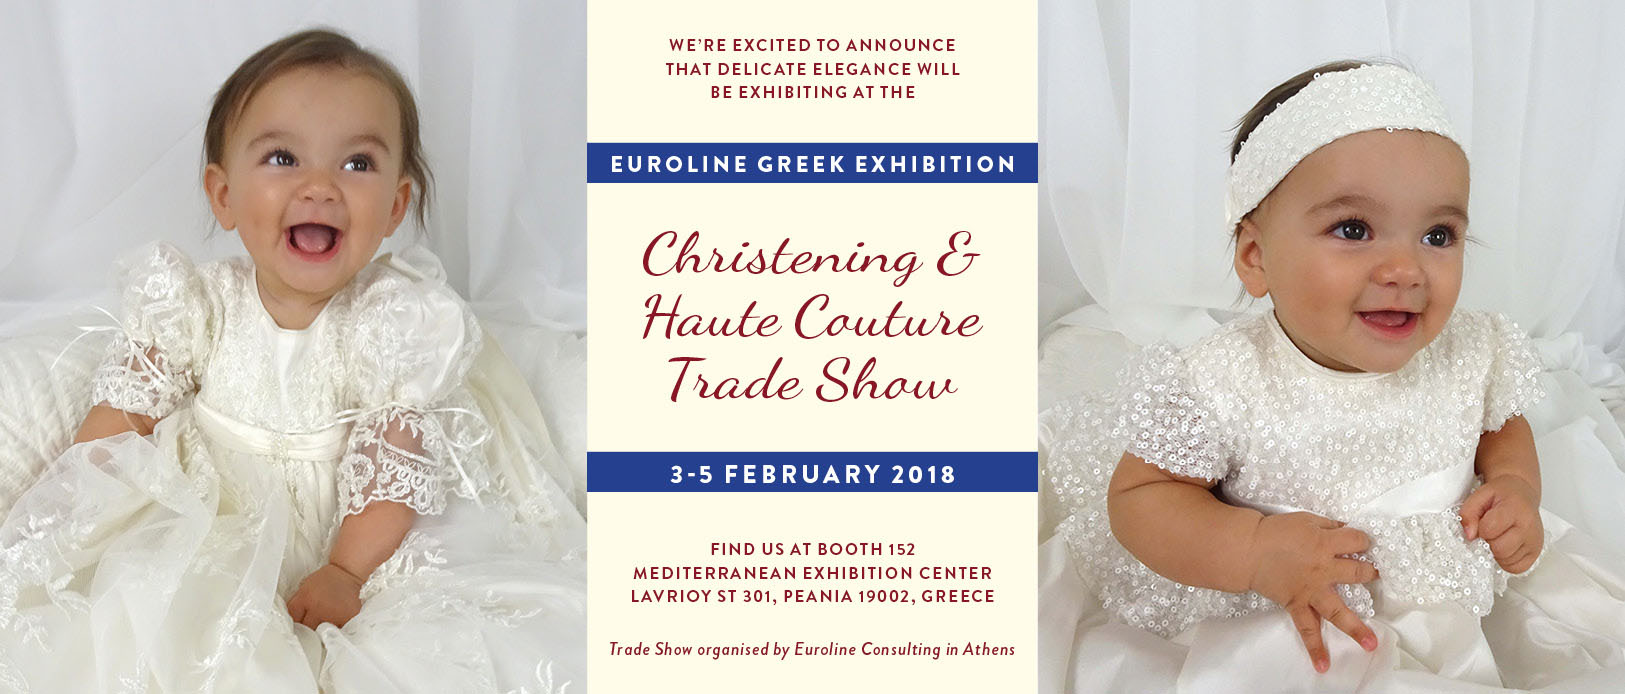 Delicate Elegance at the Christening trade show in Greece (3-5 February 2018)